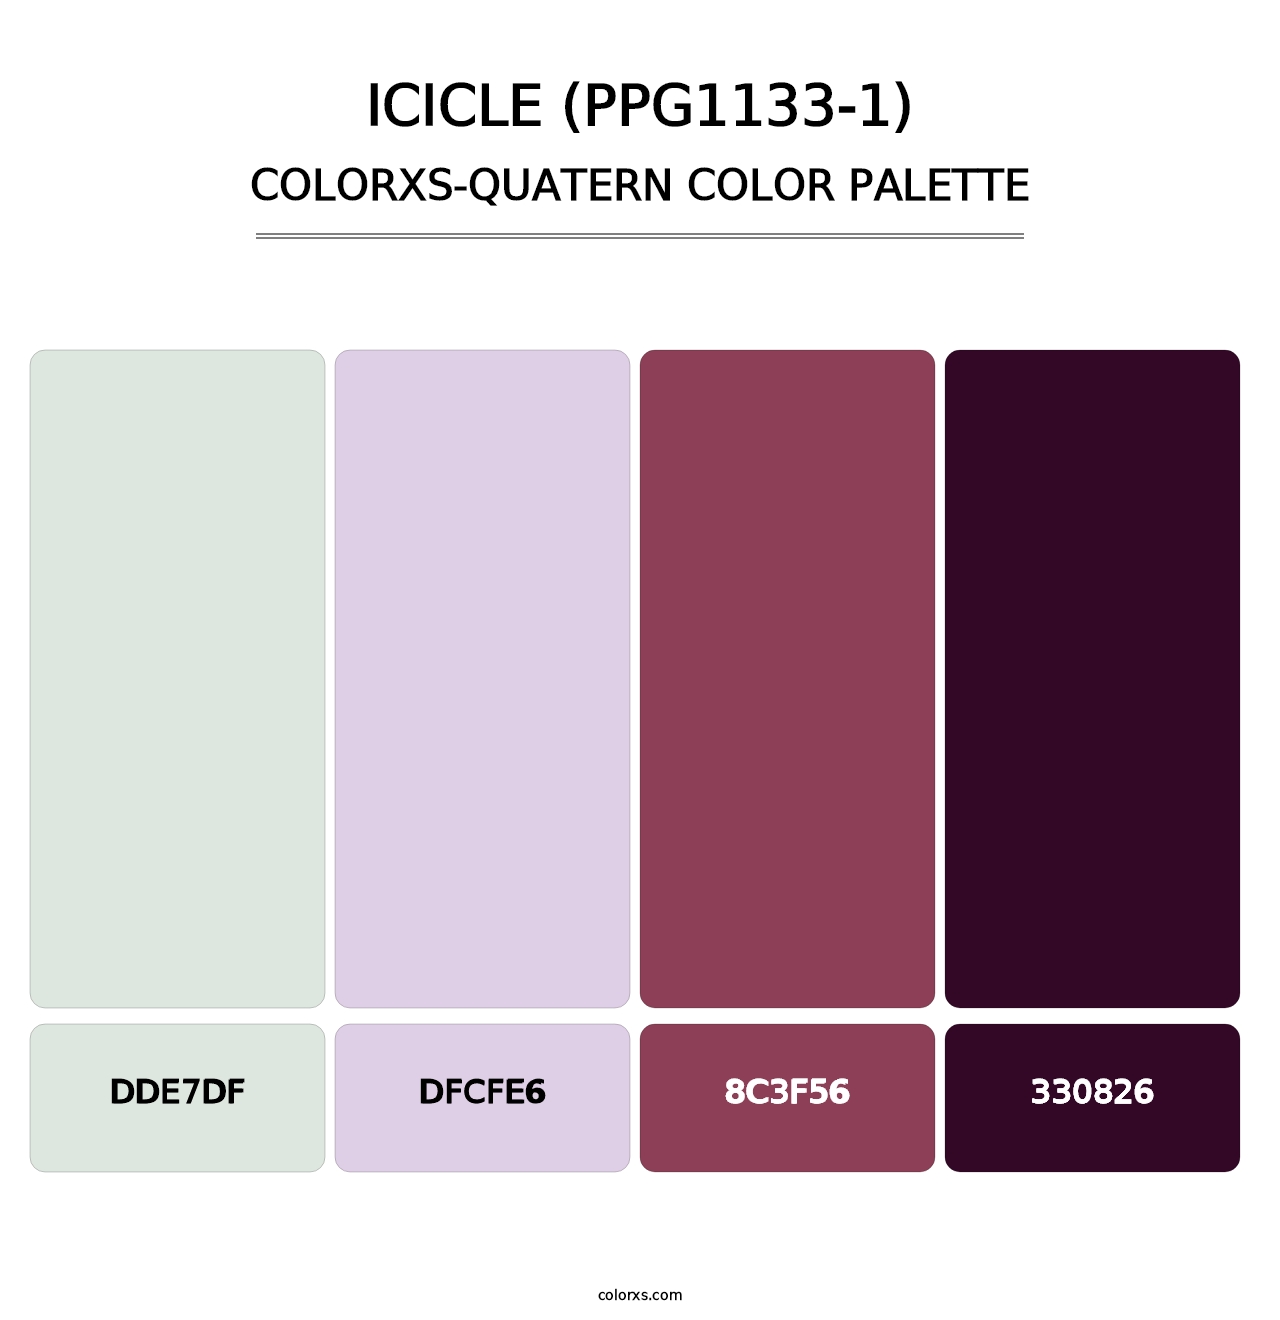 Icicle (PPG1133-1) - Colorxs Quatern Palette